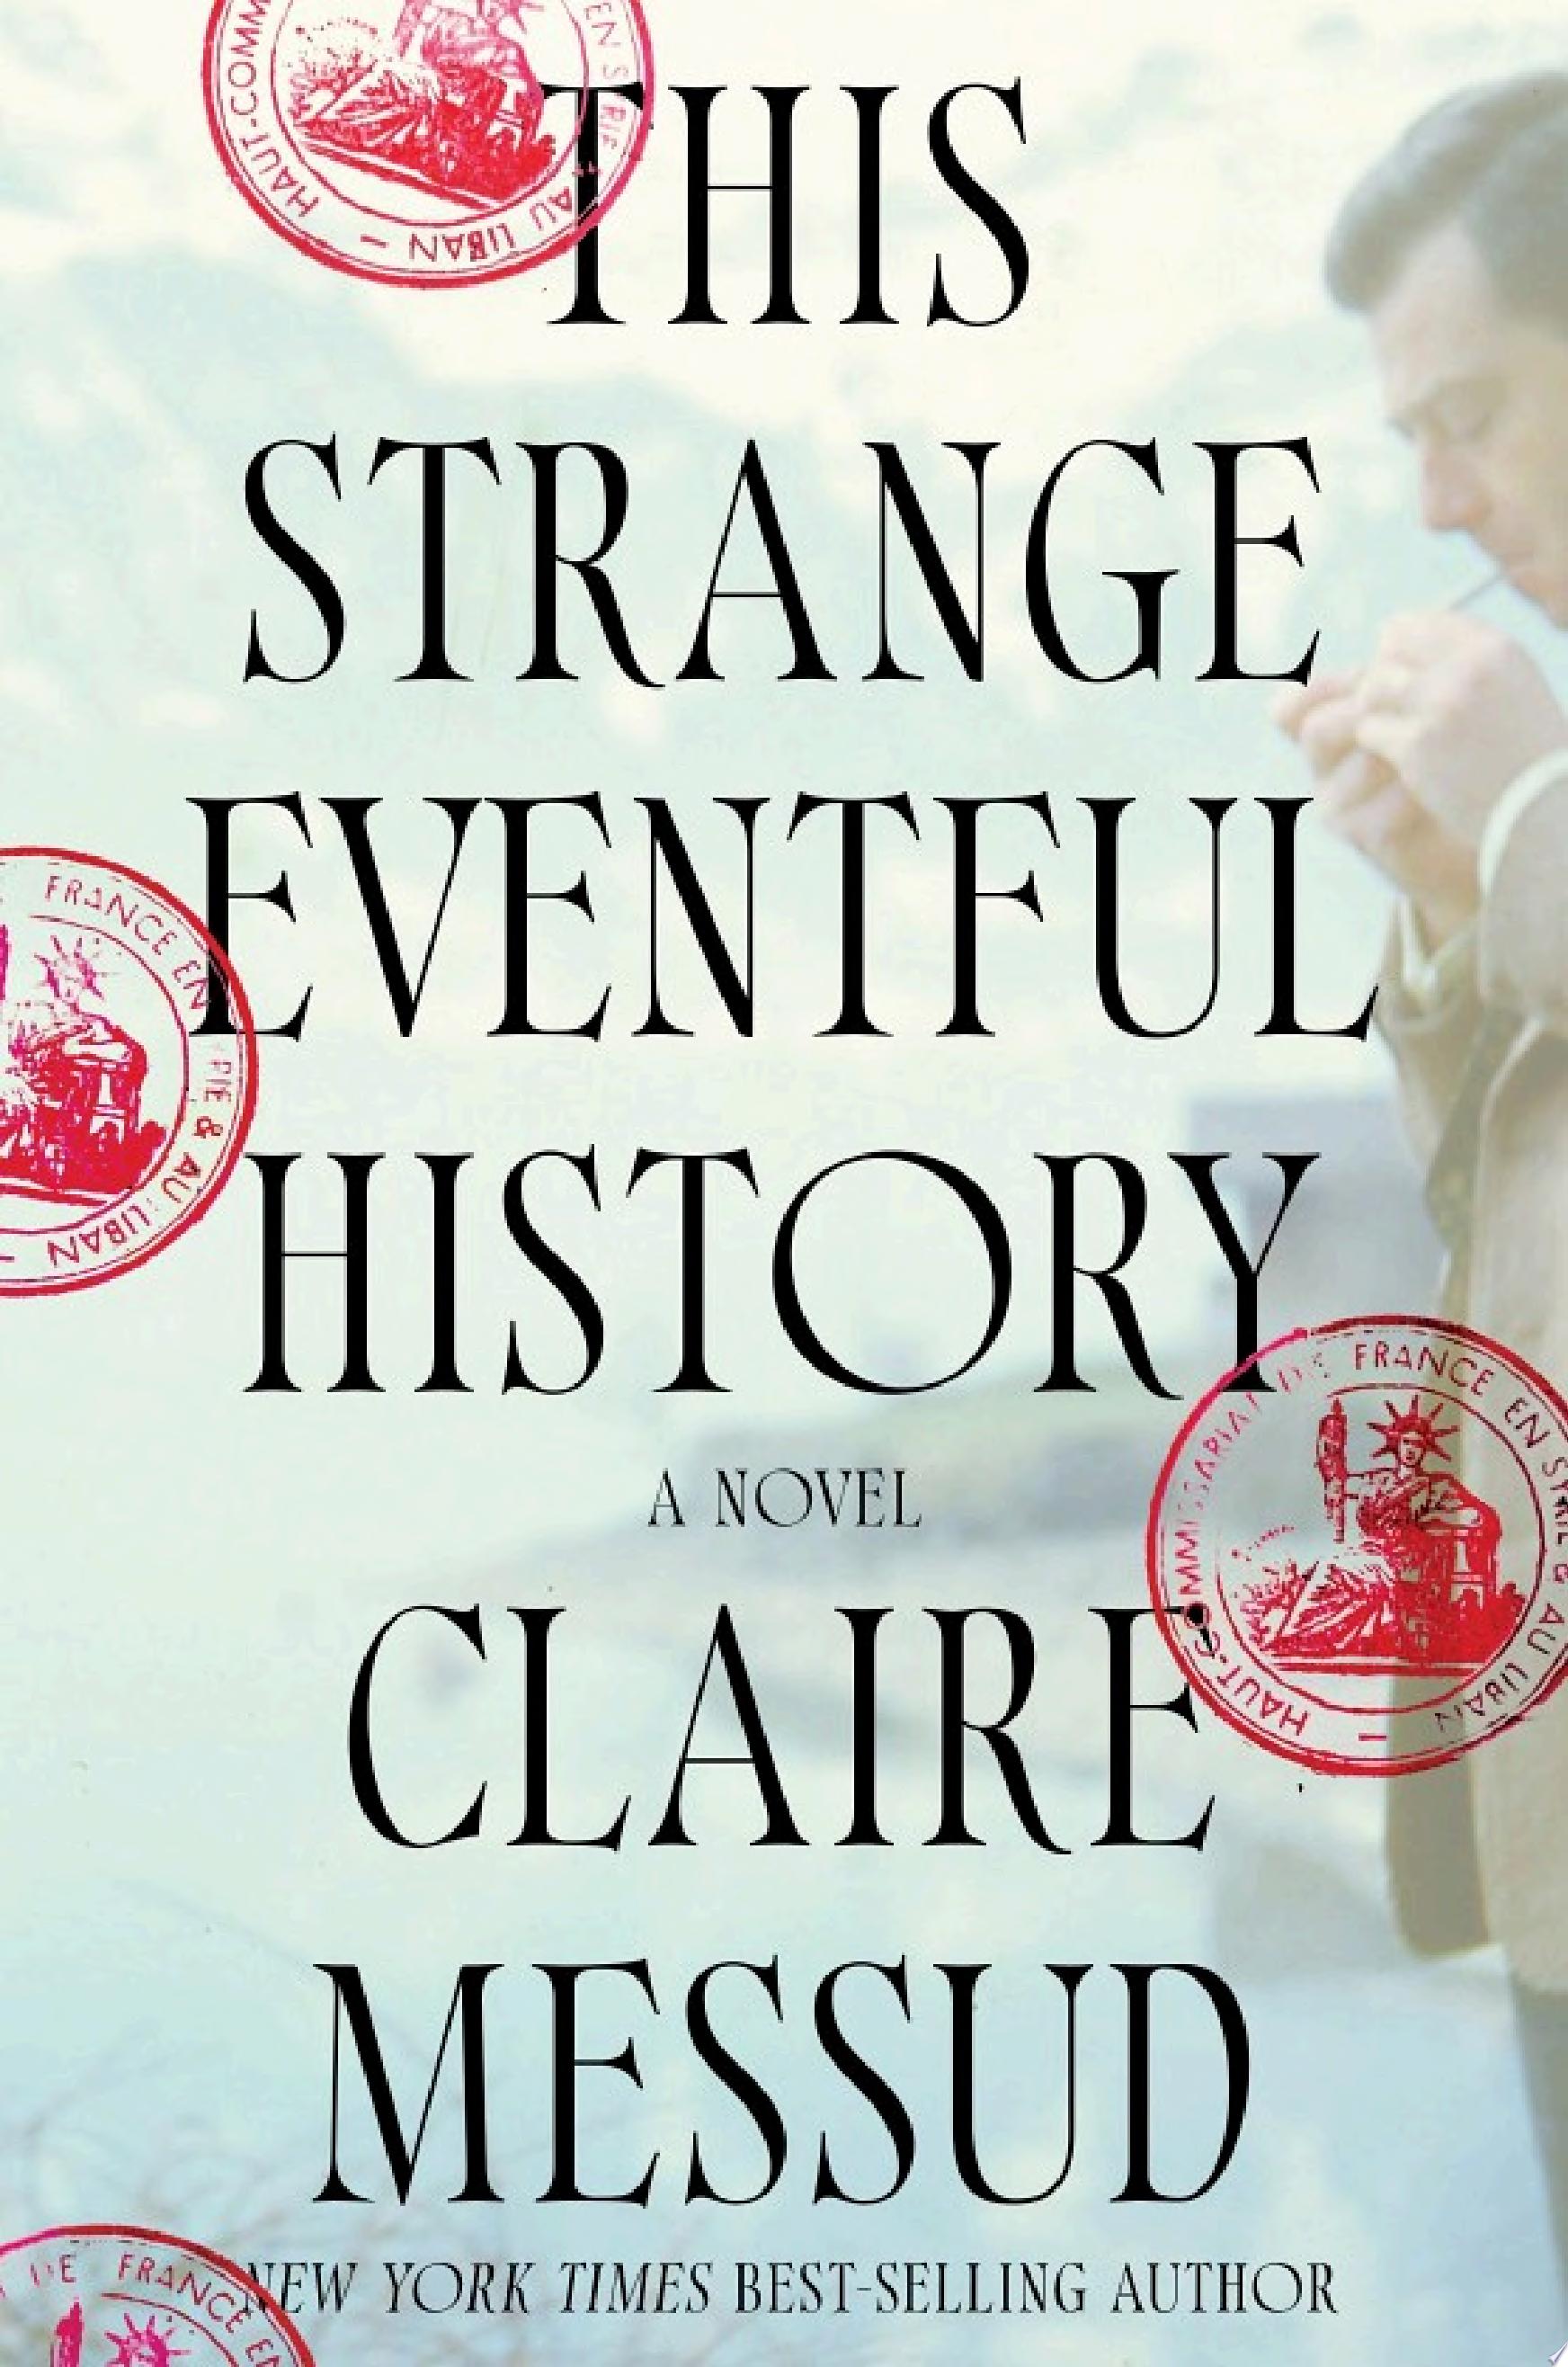 Image for "This Strange Eventful History: A Novel"